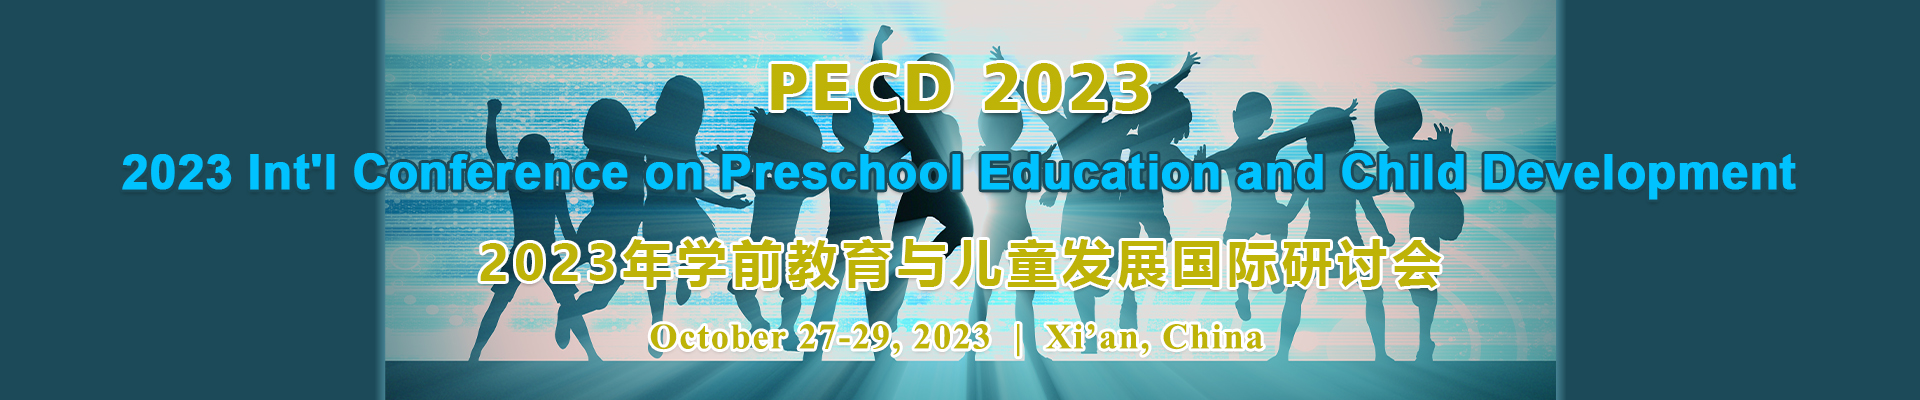 2023 Int'l Conference on Preschool Education and Child Development (PECD 2023), Xi'an, Shaanxi, China